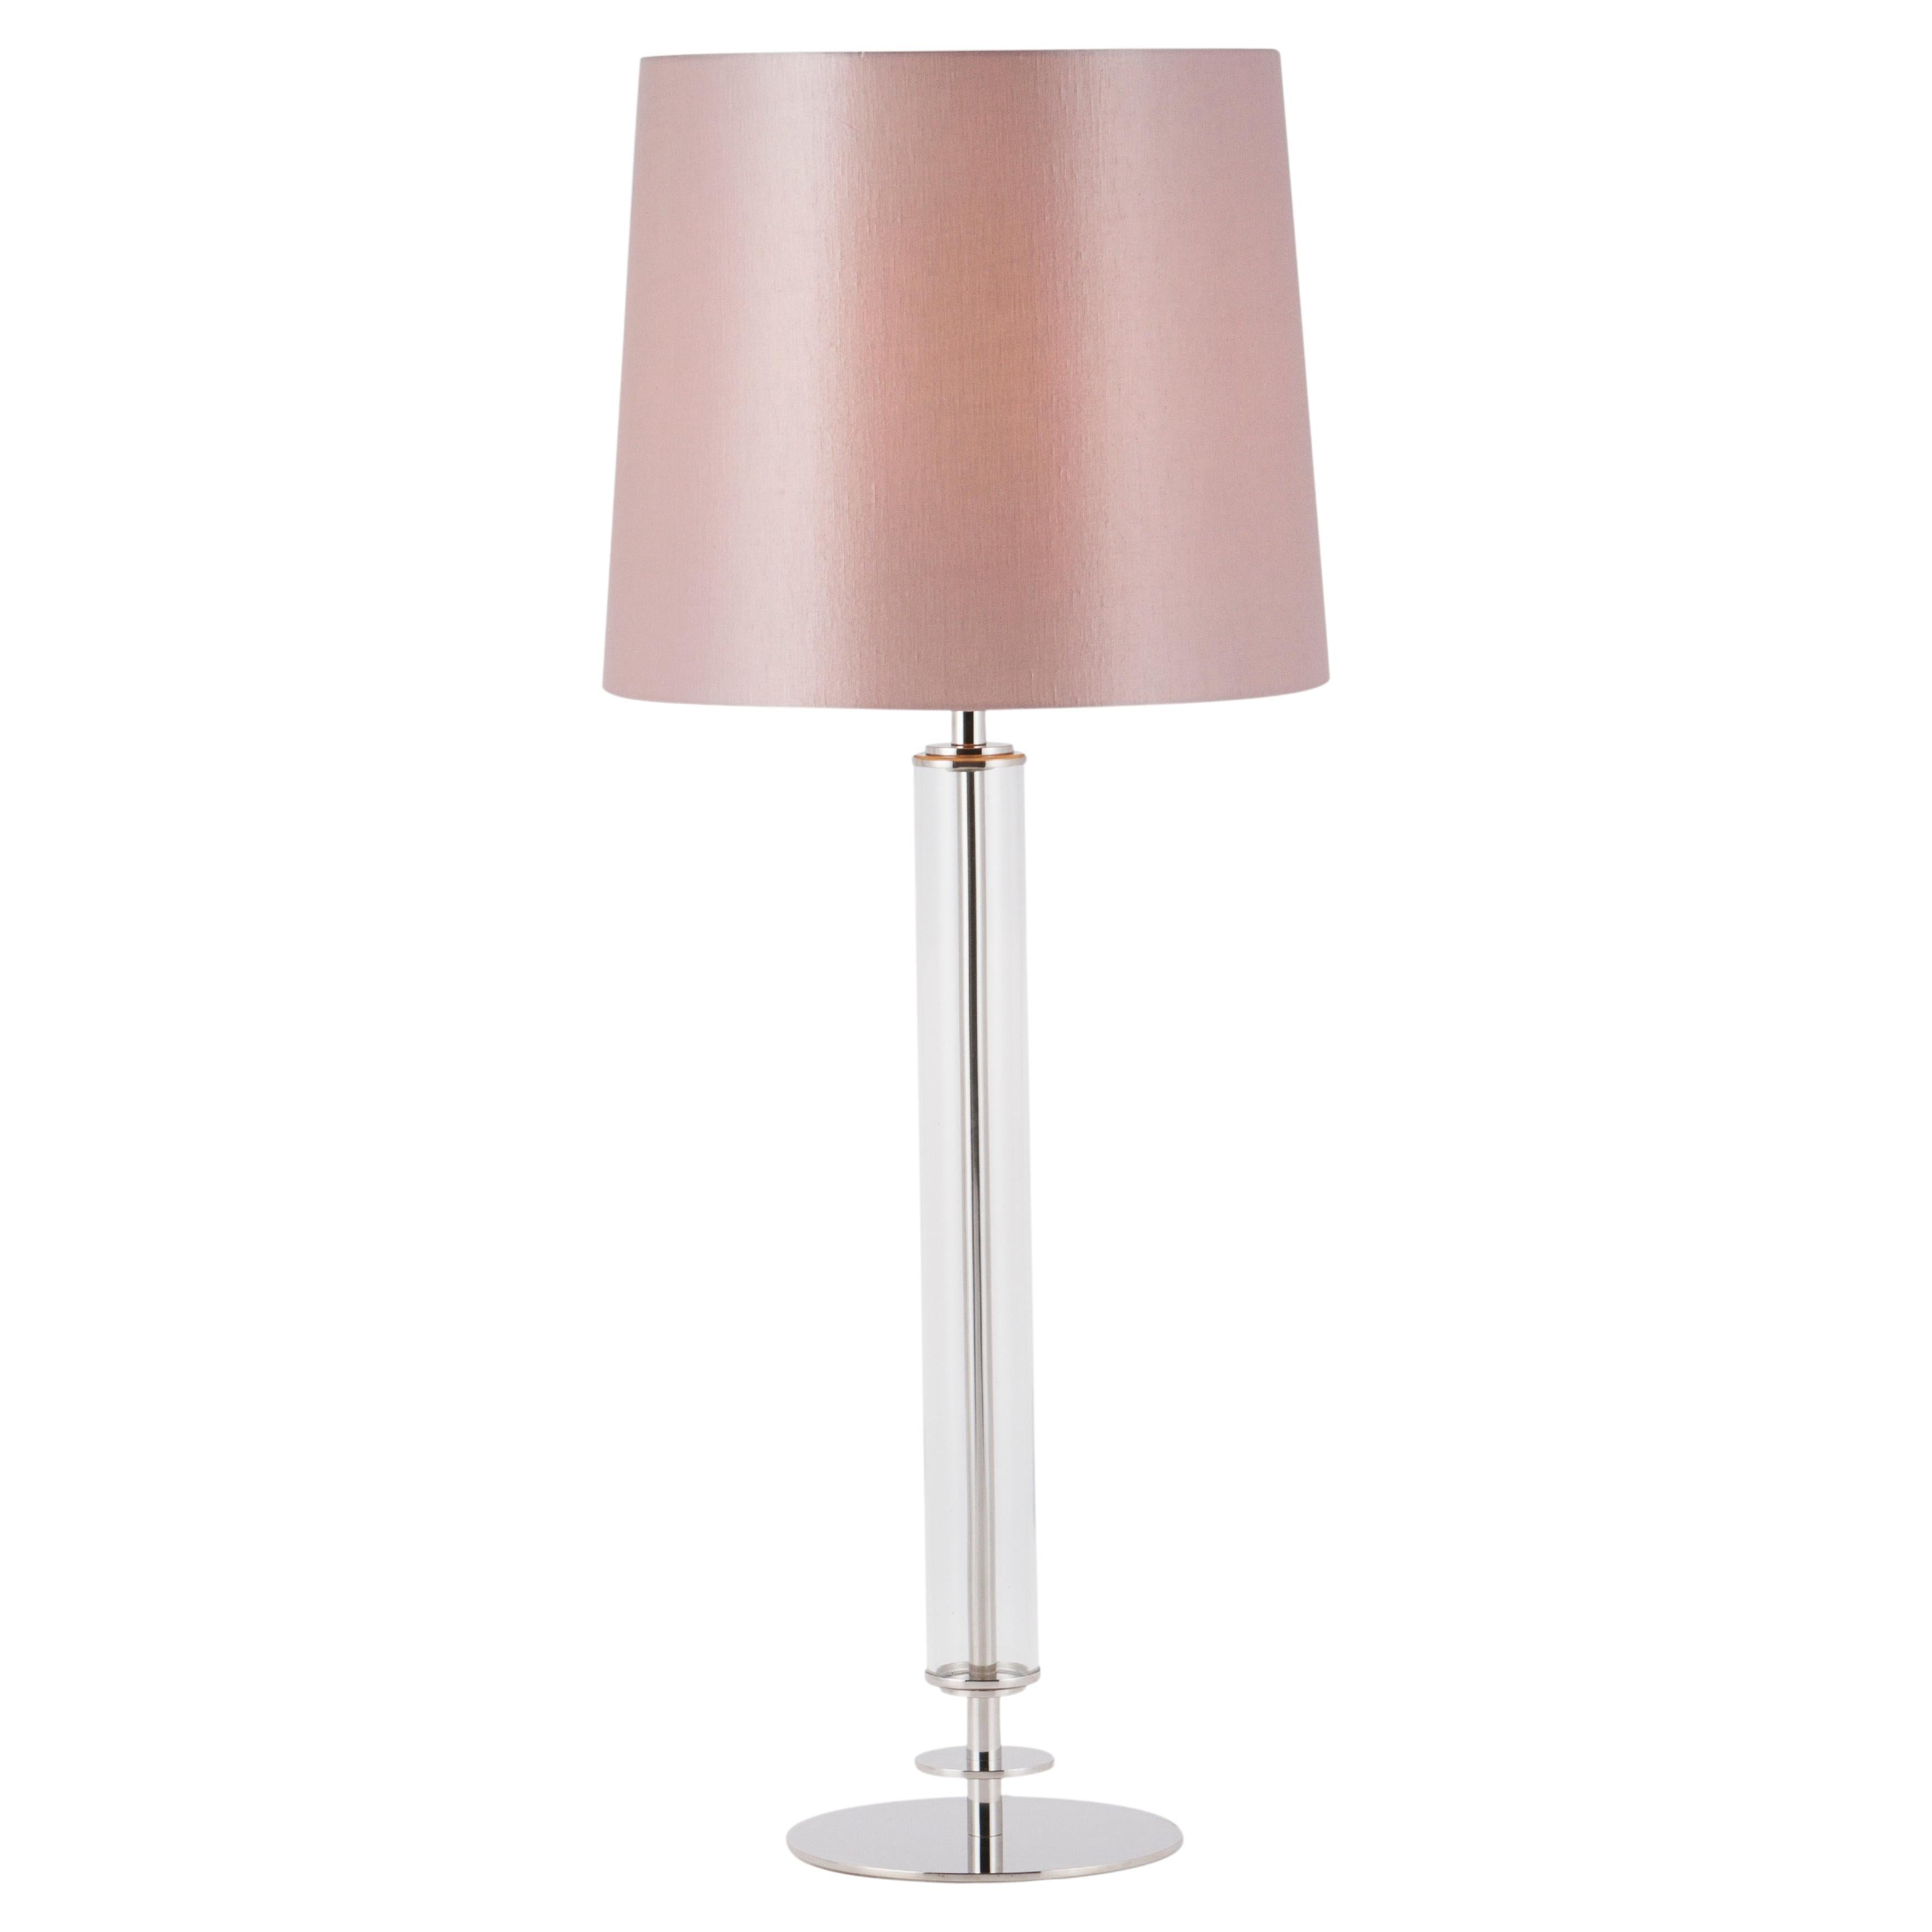 Set of 2 Modern Dumont Table Lamps, Pink Lampshade, Handmade in Portugal In New Condition For Sale In Lisboa, PT